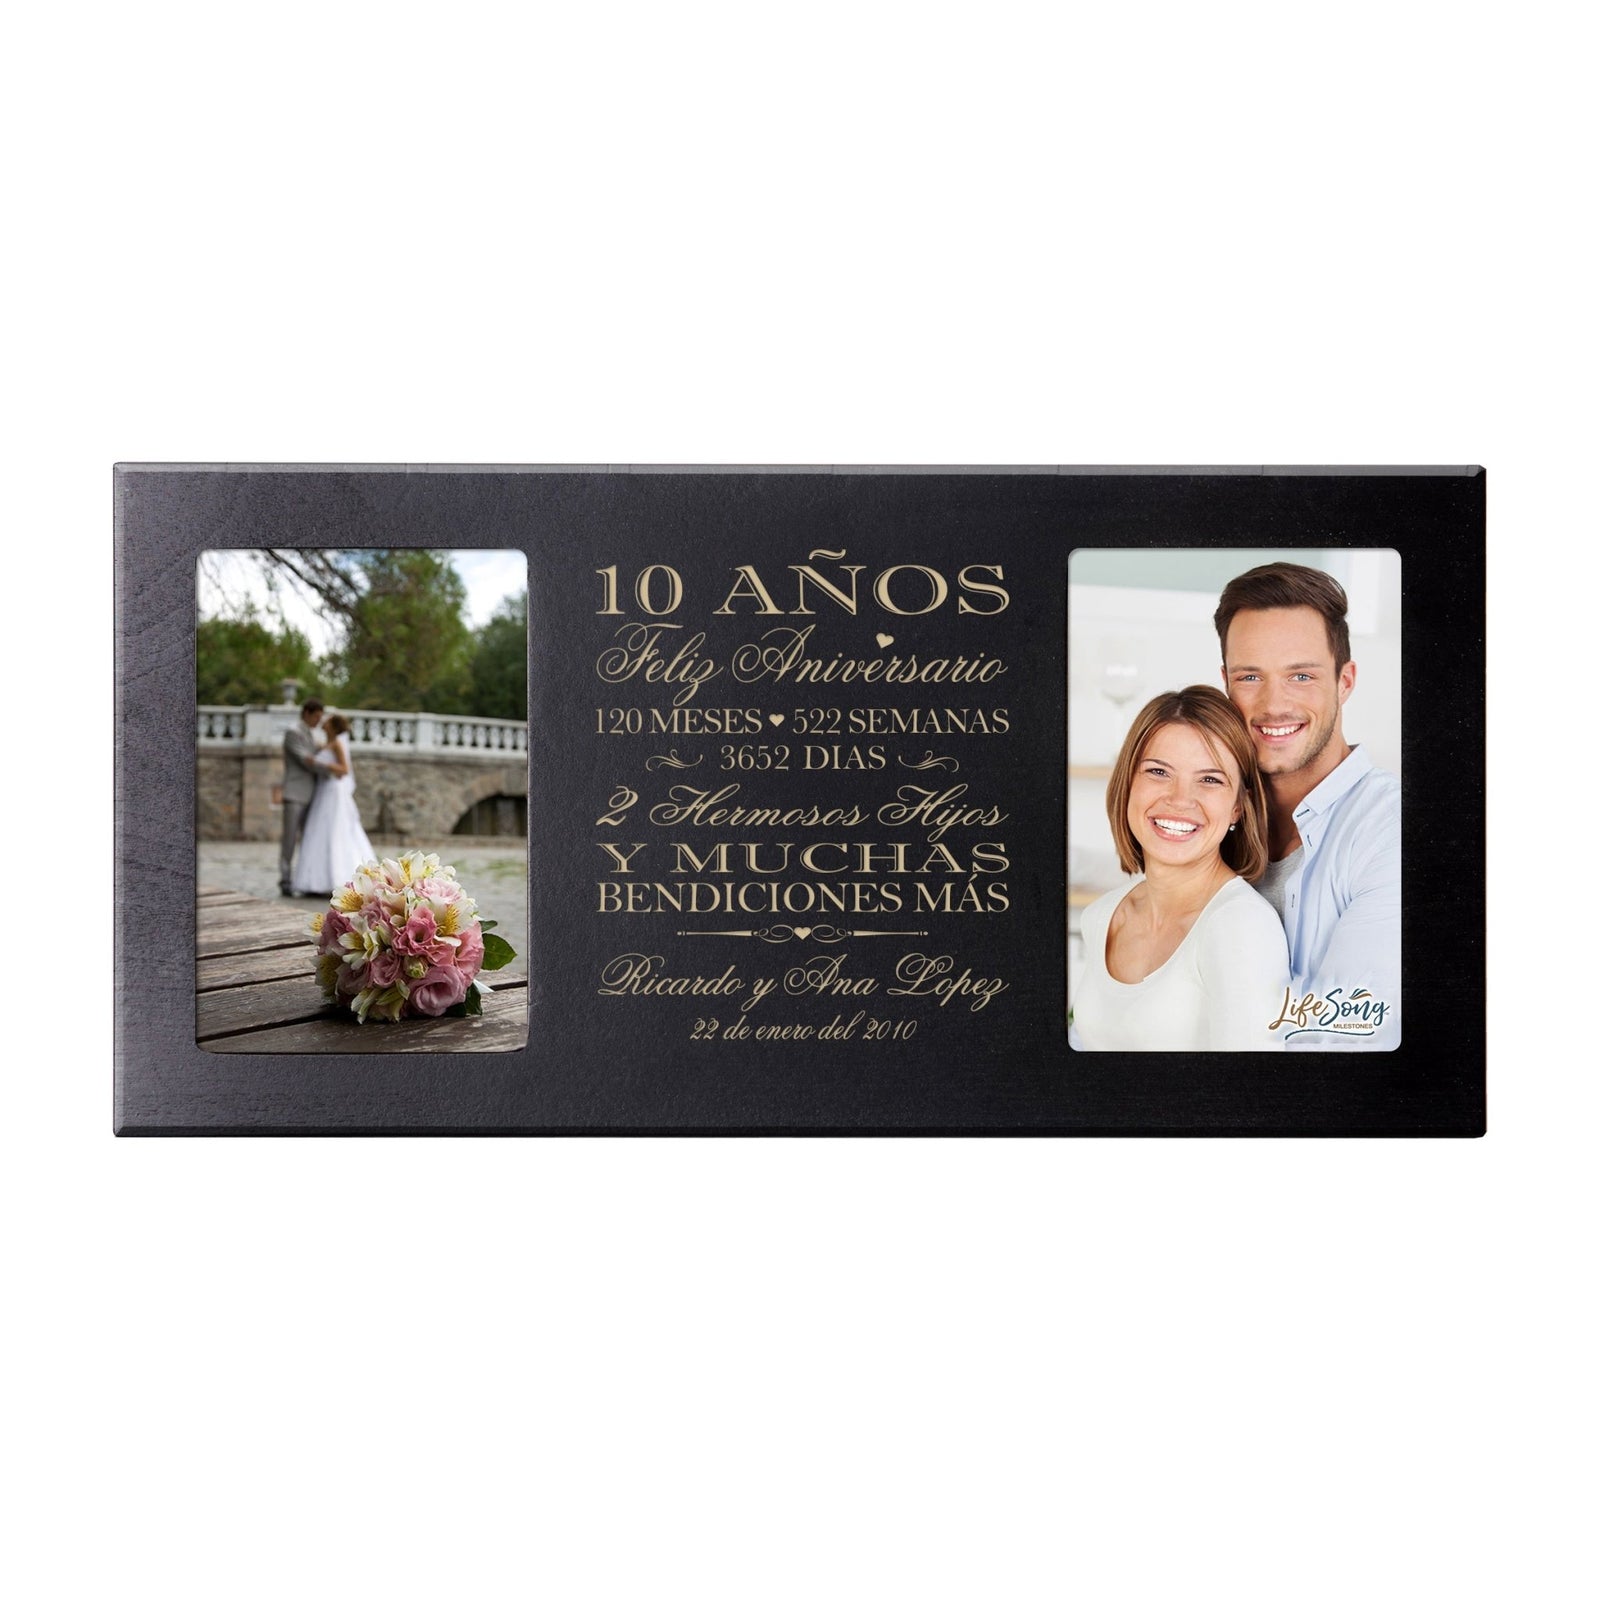 Personalized 10th Anniversary Picture Frame Holds 2-4x6 Photos (Spanish Verse) - LifeSong Milestones